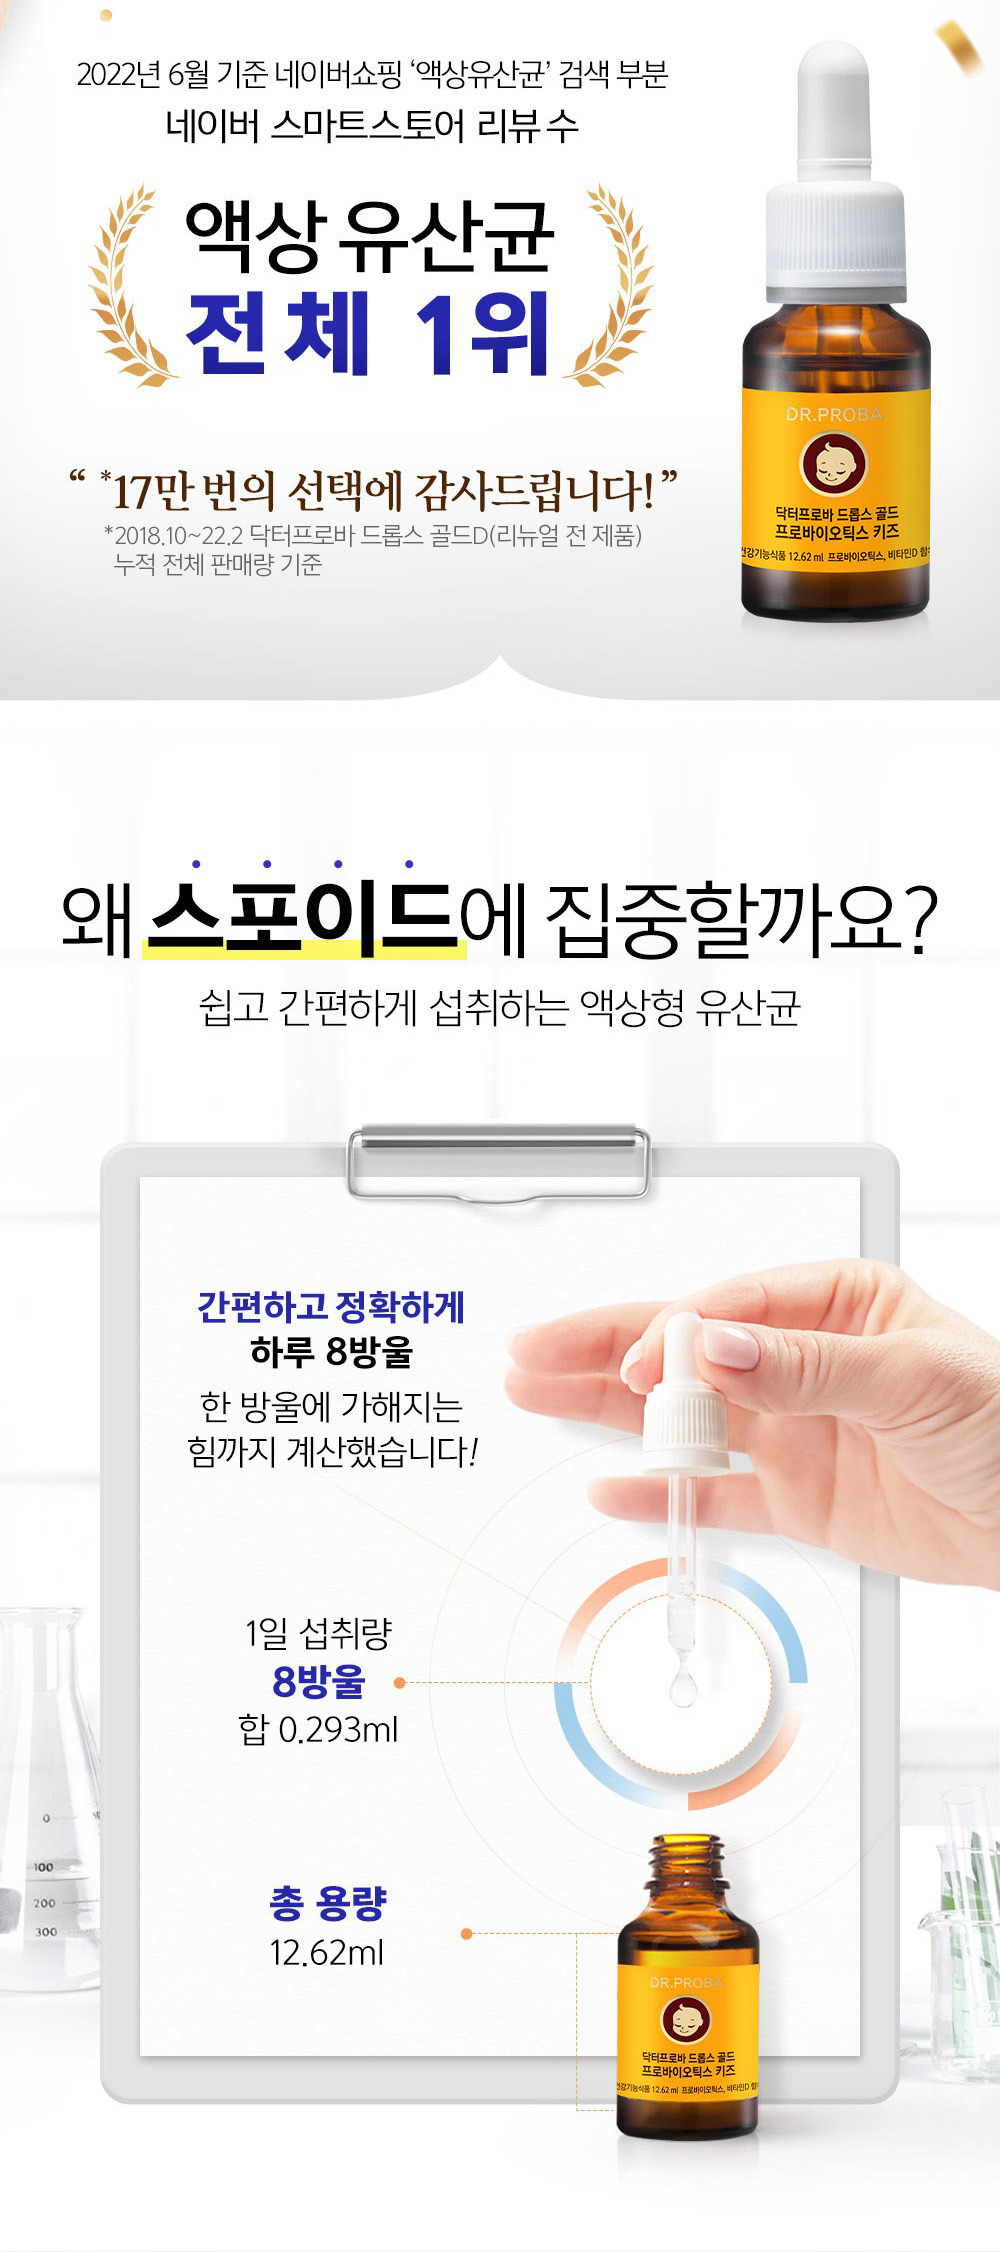 As of June 2022, Naver Shopping ‘Liquid Lactobacillus’ search section, Naver Smart Store Review Number 1st overall for Liquid Lactobacillus “*Thank you for choosing 170,000 times!” *2018.10?22.2 Based on total cumulative sales Why focus on droppers? Liquid lactic acid bacteria that can be easily and conveniently consumed. We calculated the force applied to each drop of 8 drops a day simply and accurately! Daily intake 8 drops total 0.293ml total volume 12.62ml